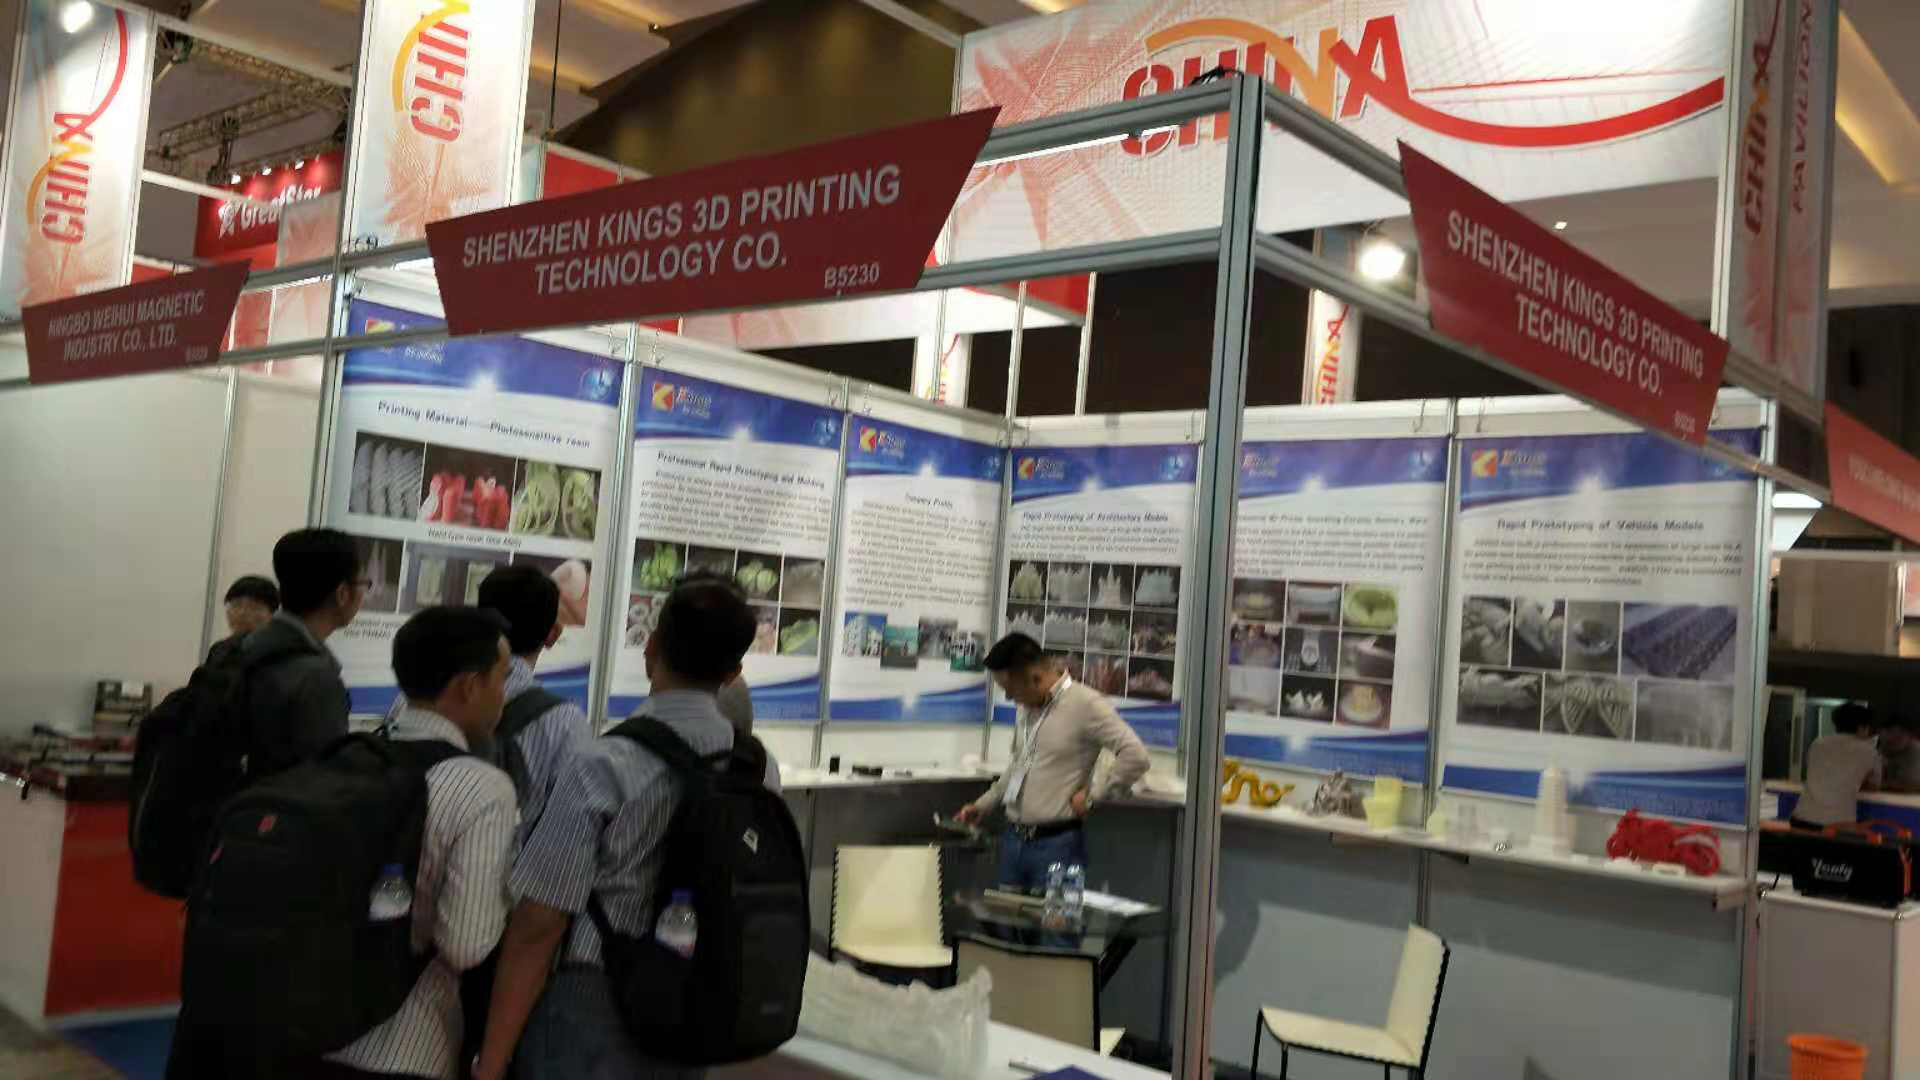 Kings SLA 3D Printer Won a Favorable Reception at Manufacturing Indonesia 2018